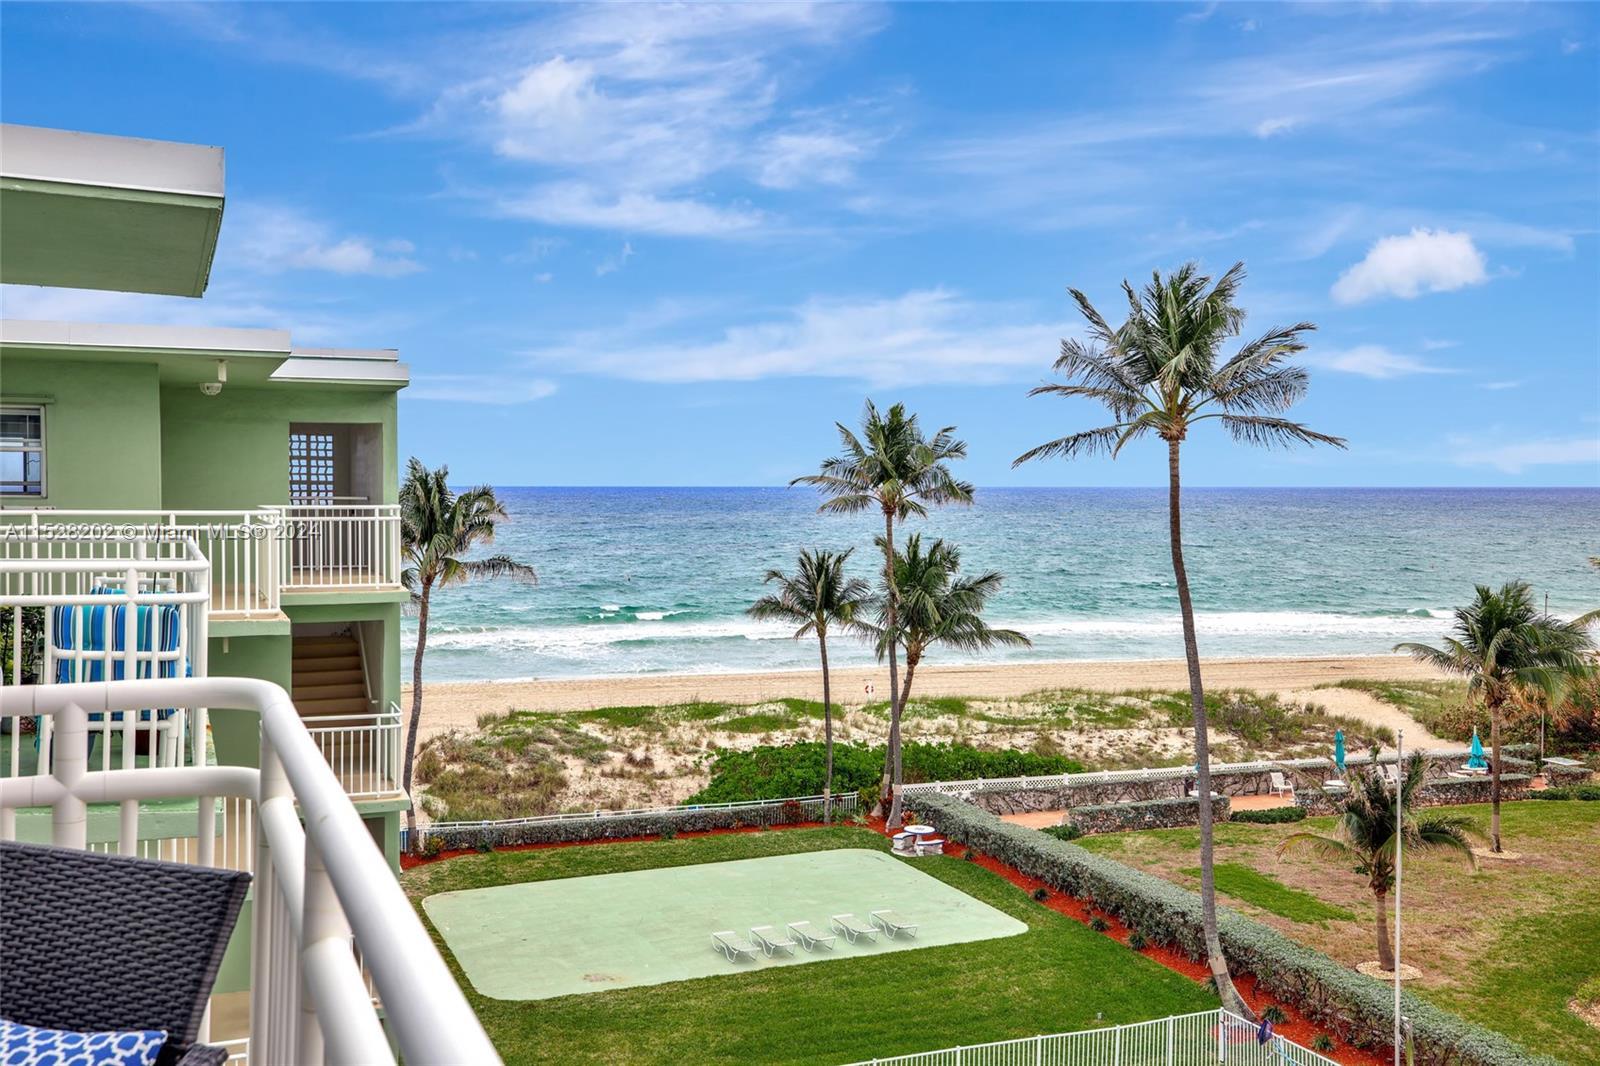 Experience beachfront living in Lauderdale by the Sea w/ this exceptional Furnished 2 bed, 2 bath Pe